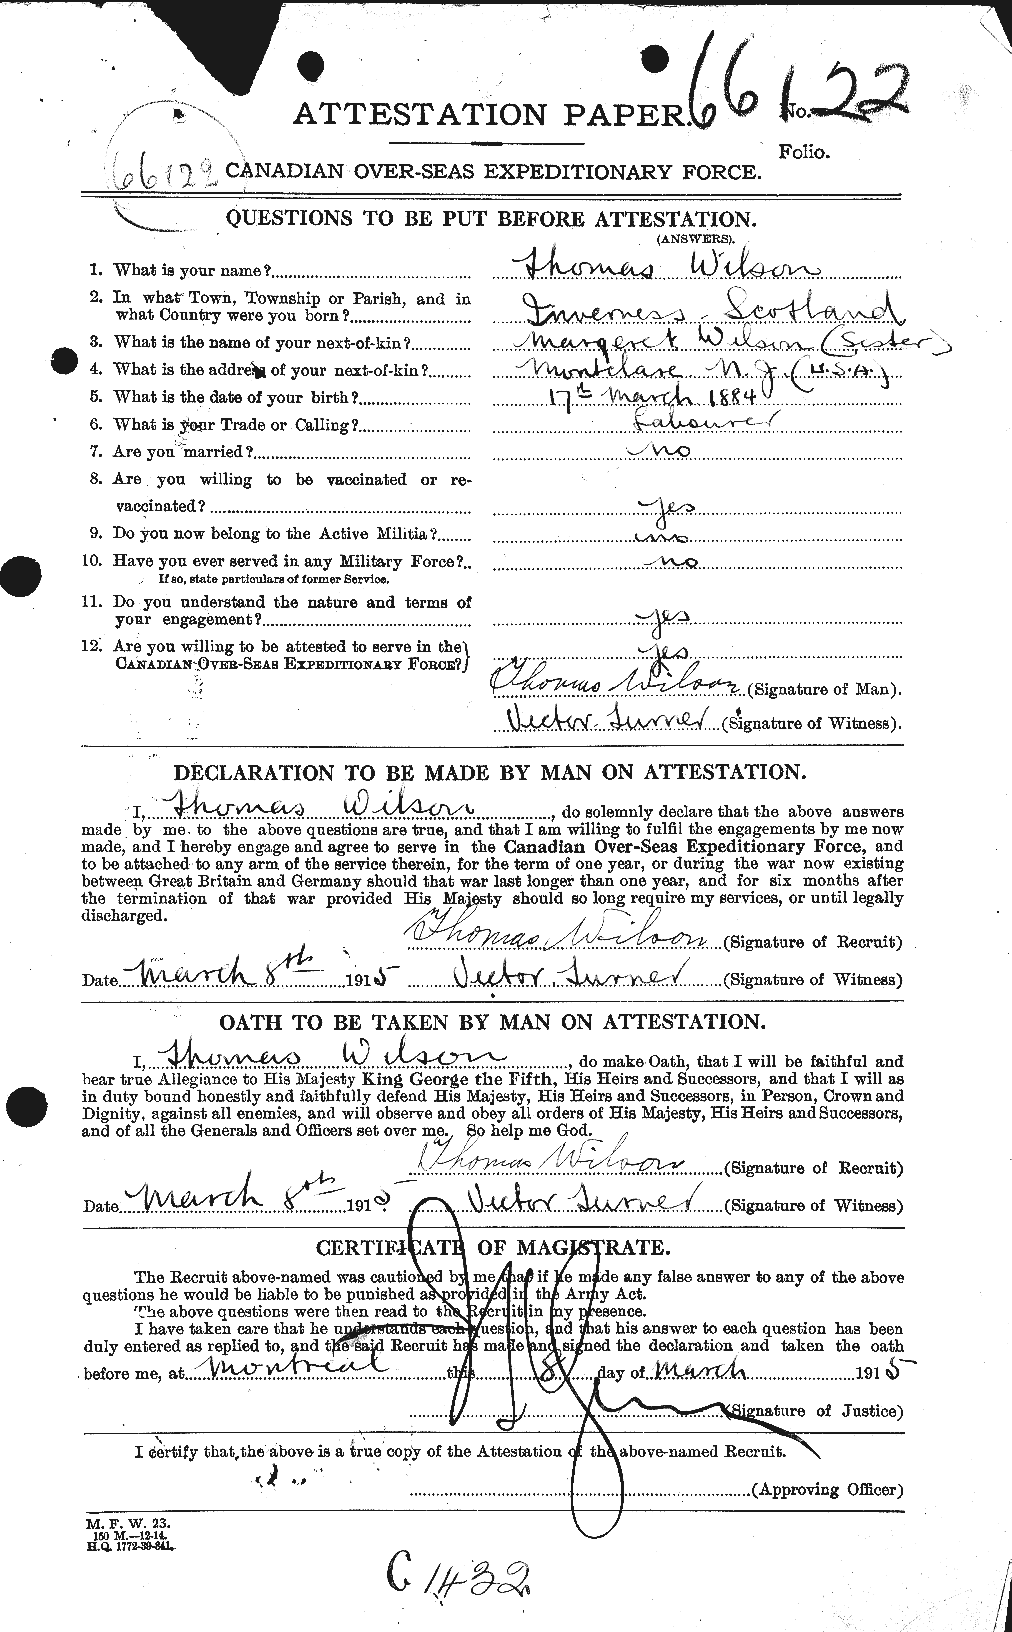 Personnel Records of the First World War - CEF 681203a